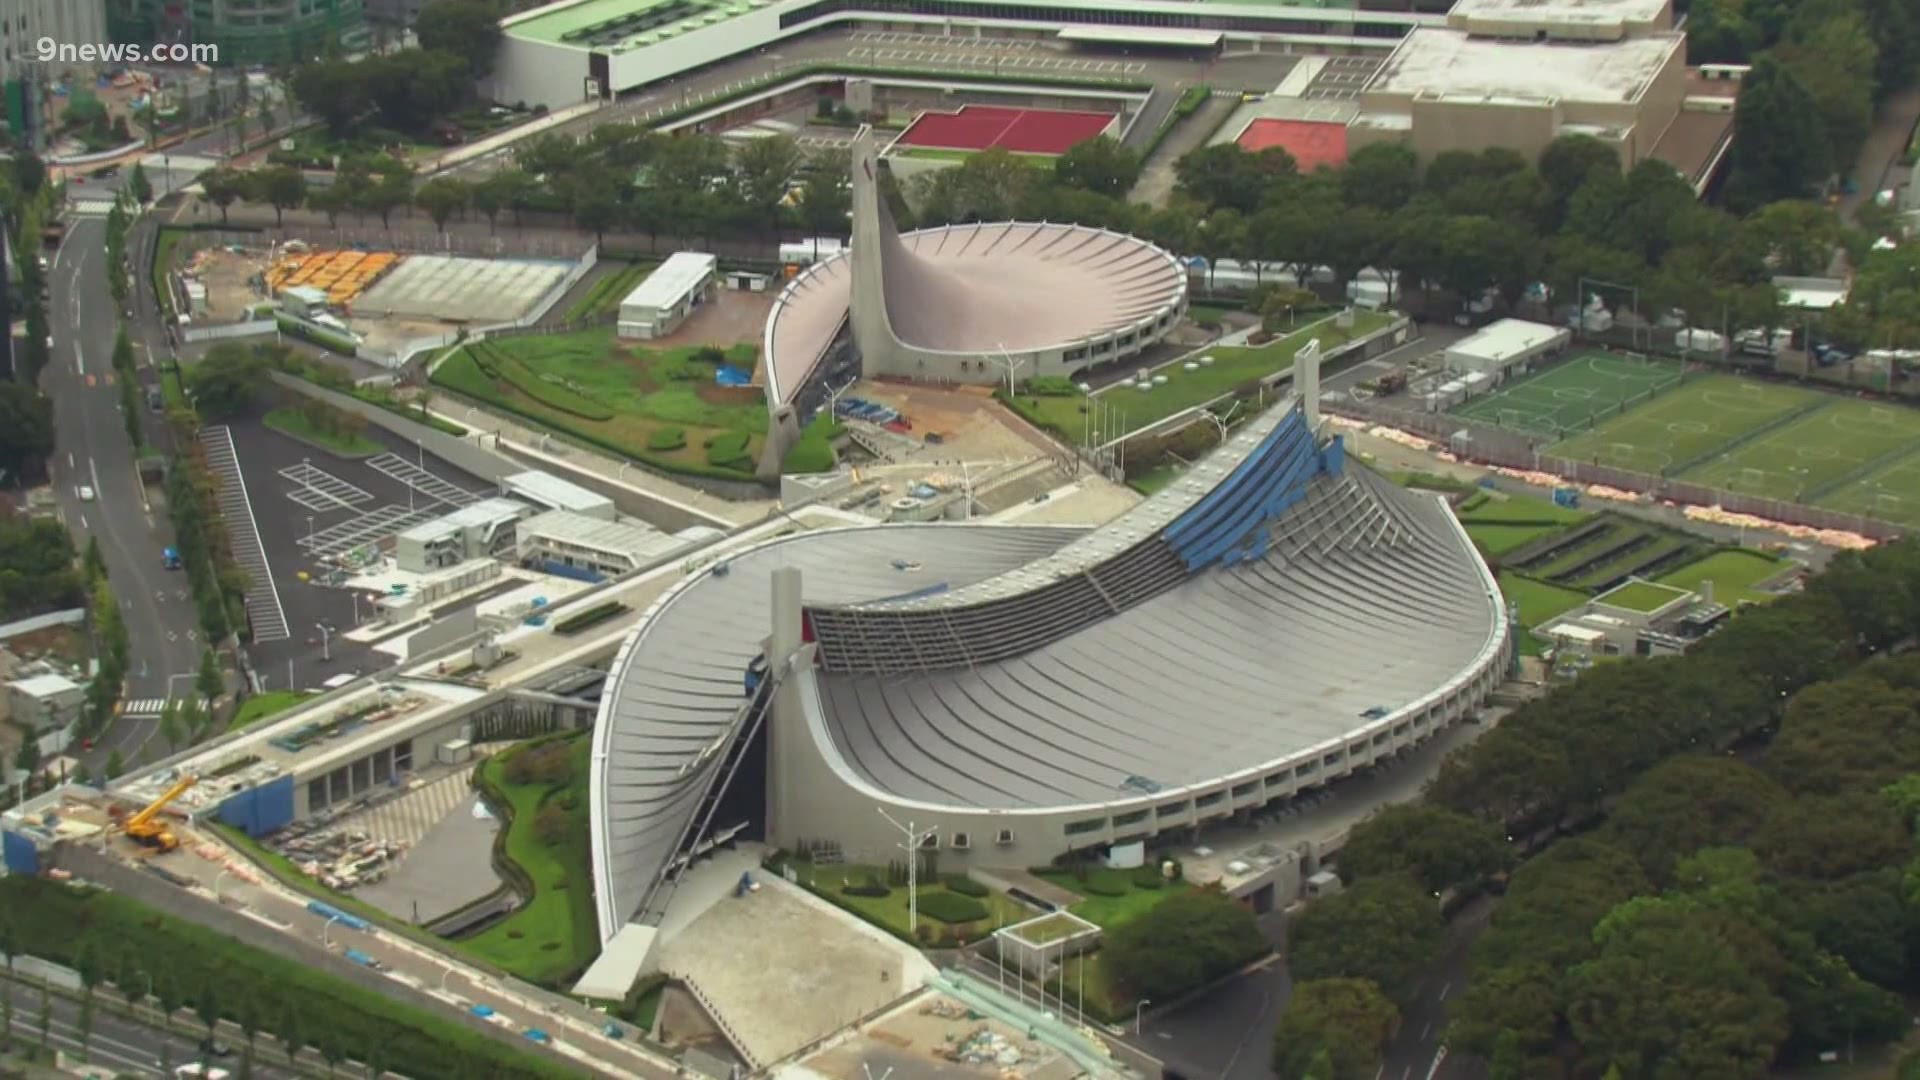 More than 40 venues are being used at the Summer Olympics in Tokyo and several of those were used the last time Japan hosted a Summer Olympics nearly 60 years ago.